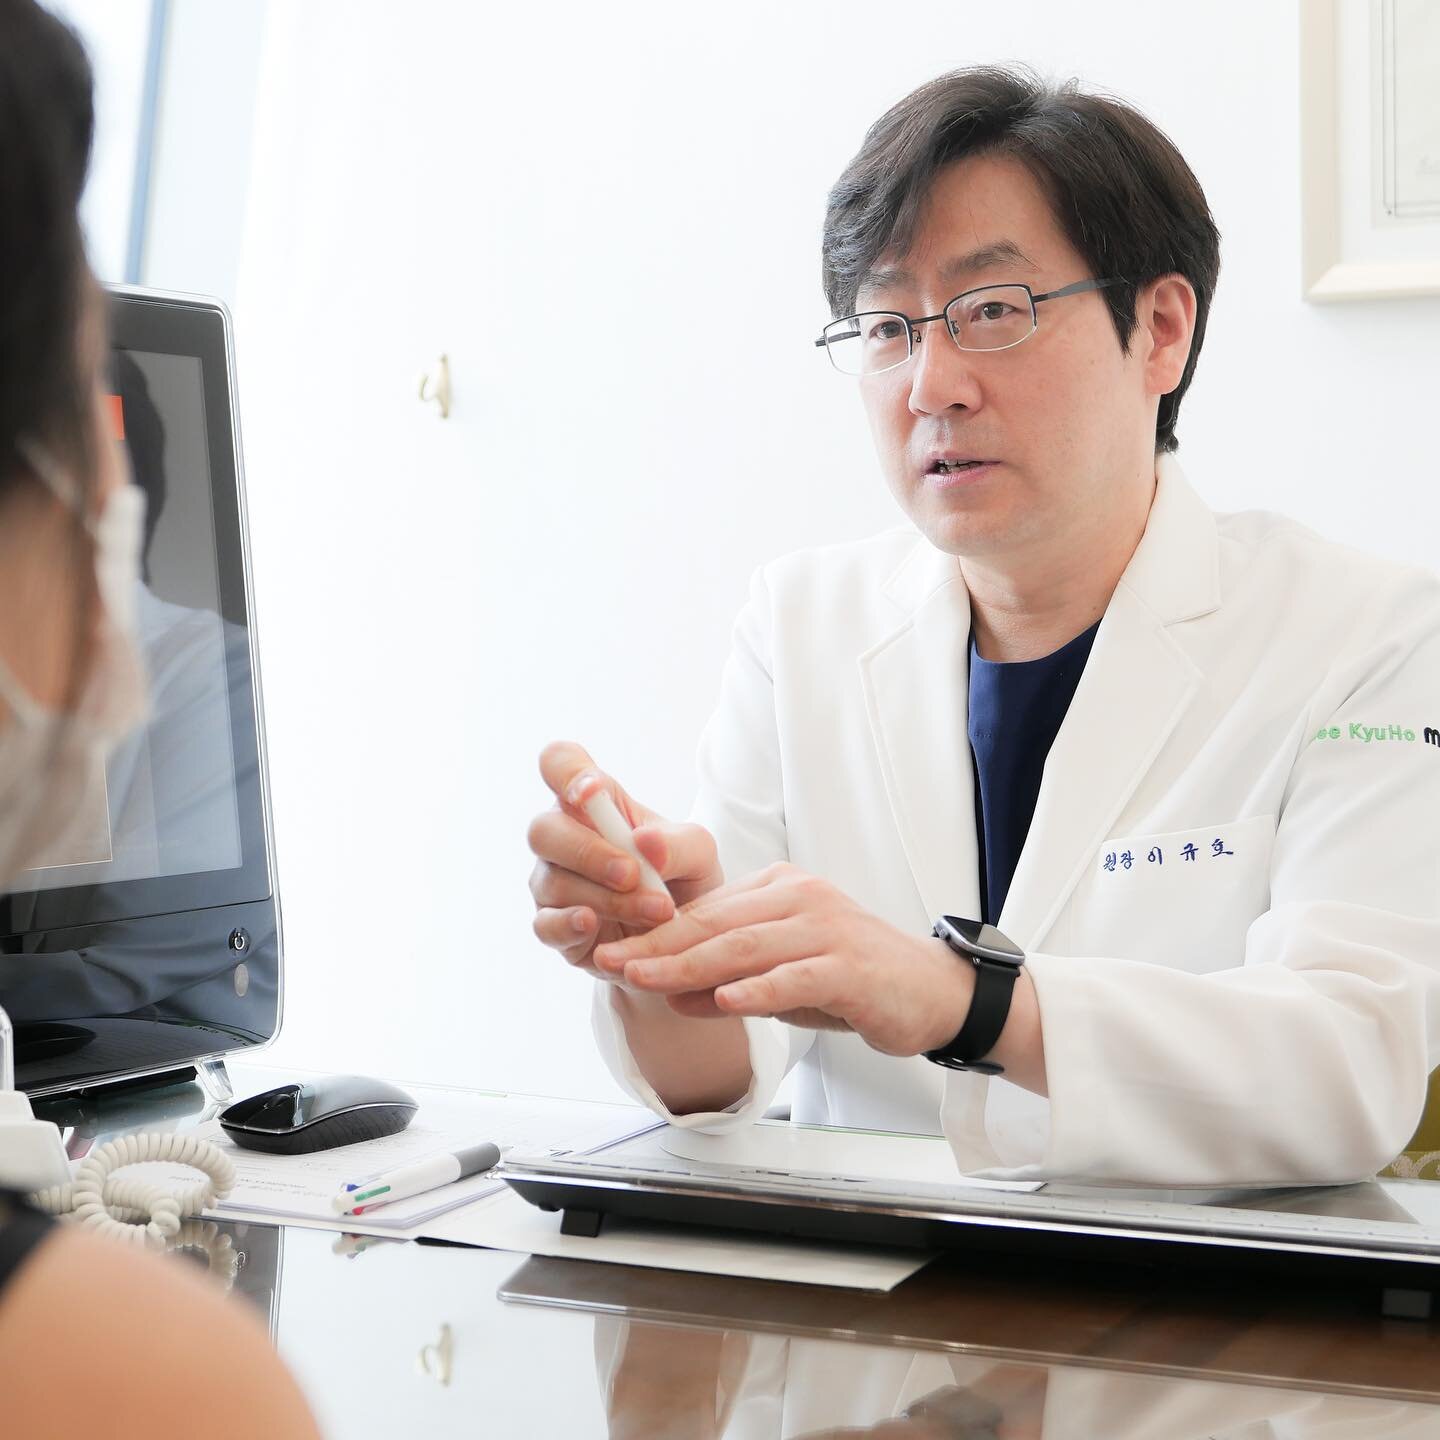 How to request online consultation

If you do not live in Seoul and is hard for you to travel for in-person consultation, we recommend you to have online consultation. From online consultation, we will be able to provide you with estimated transplant